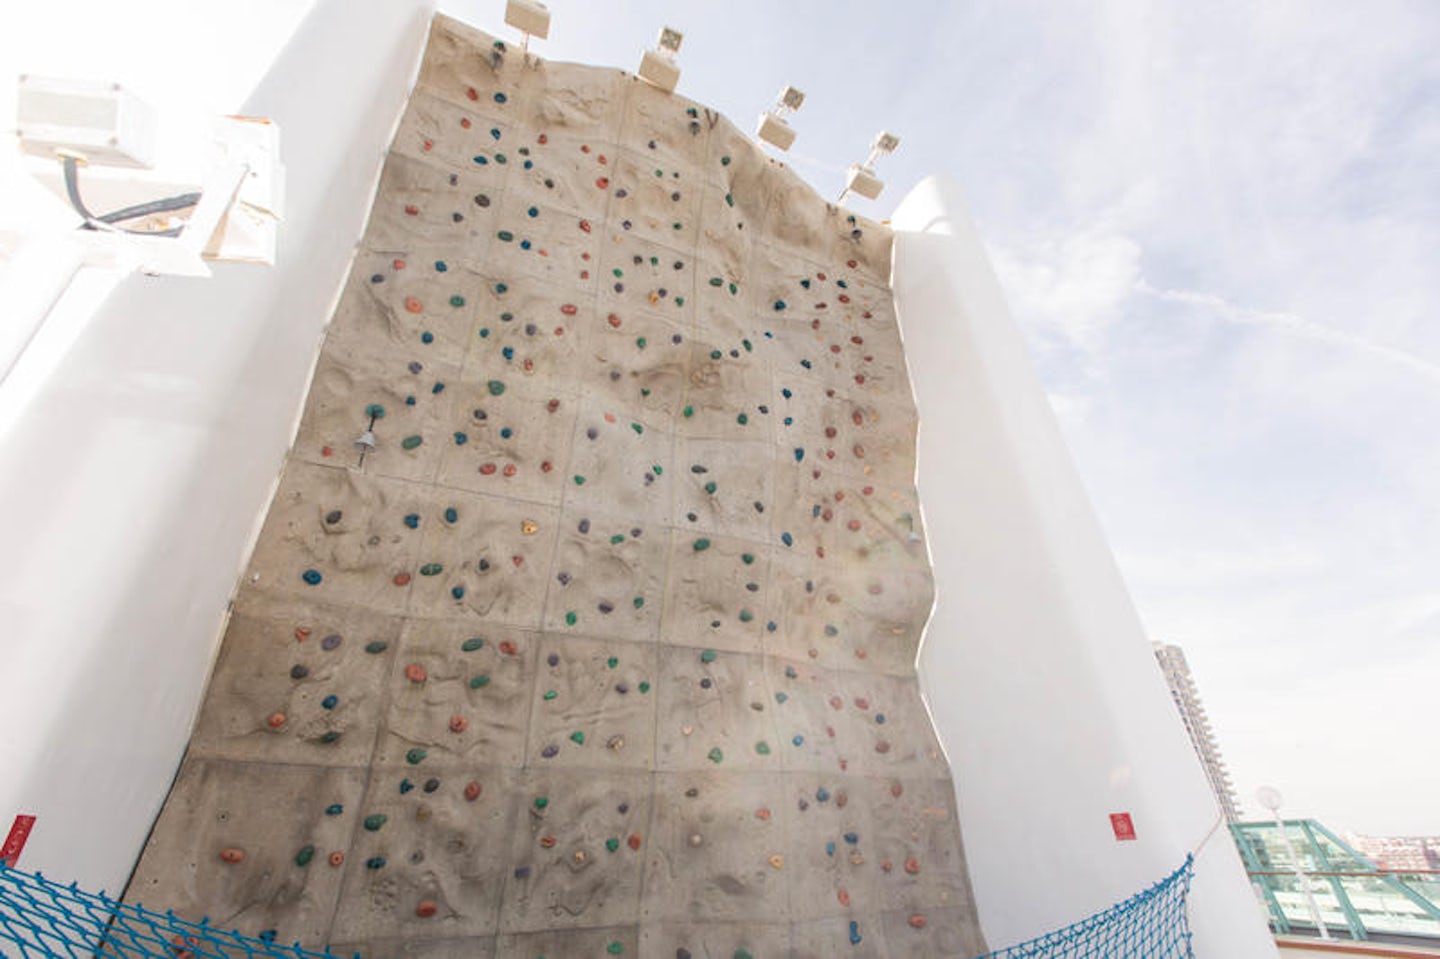 Rock Climbing Wall on Vision of the Seas